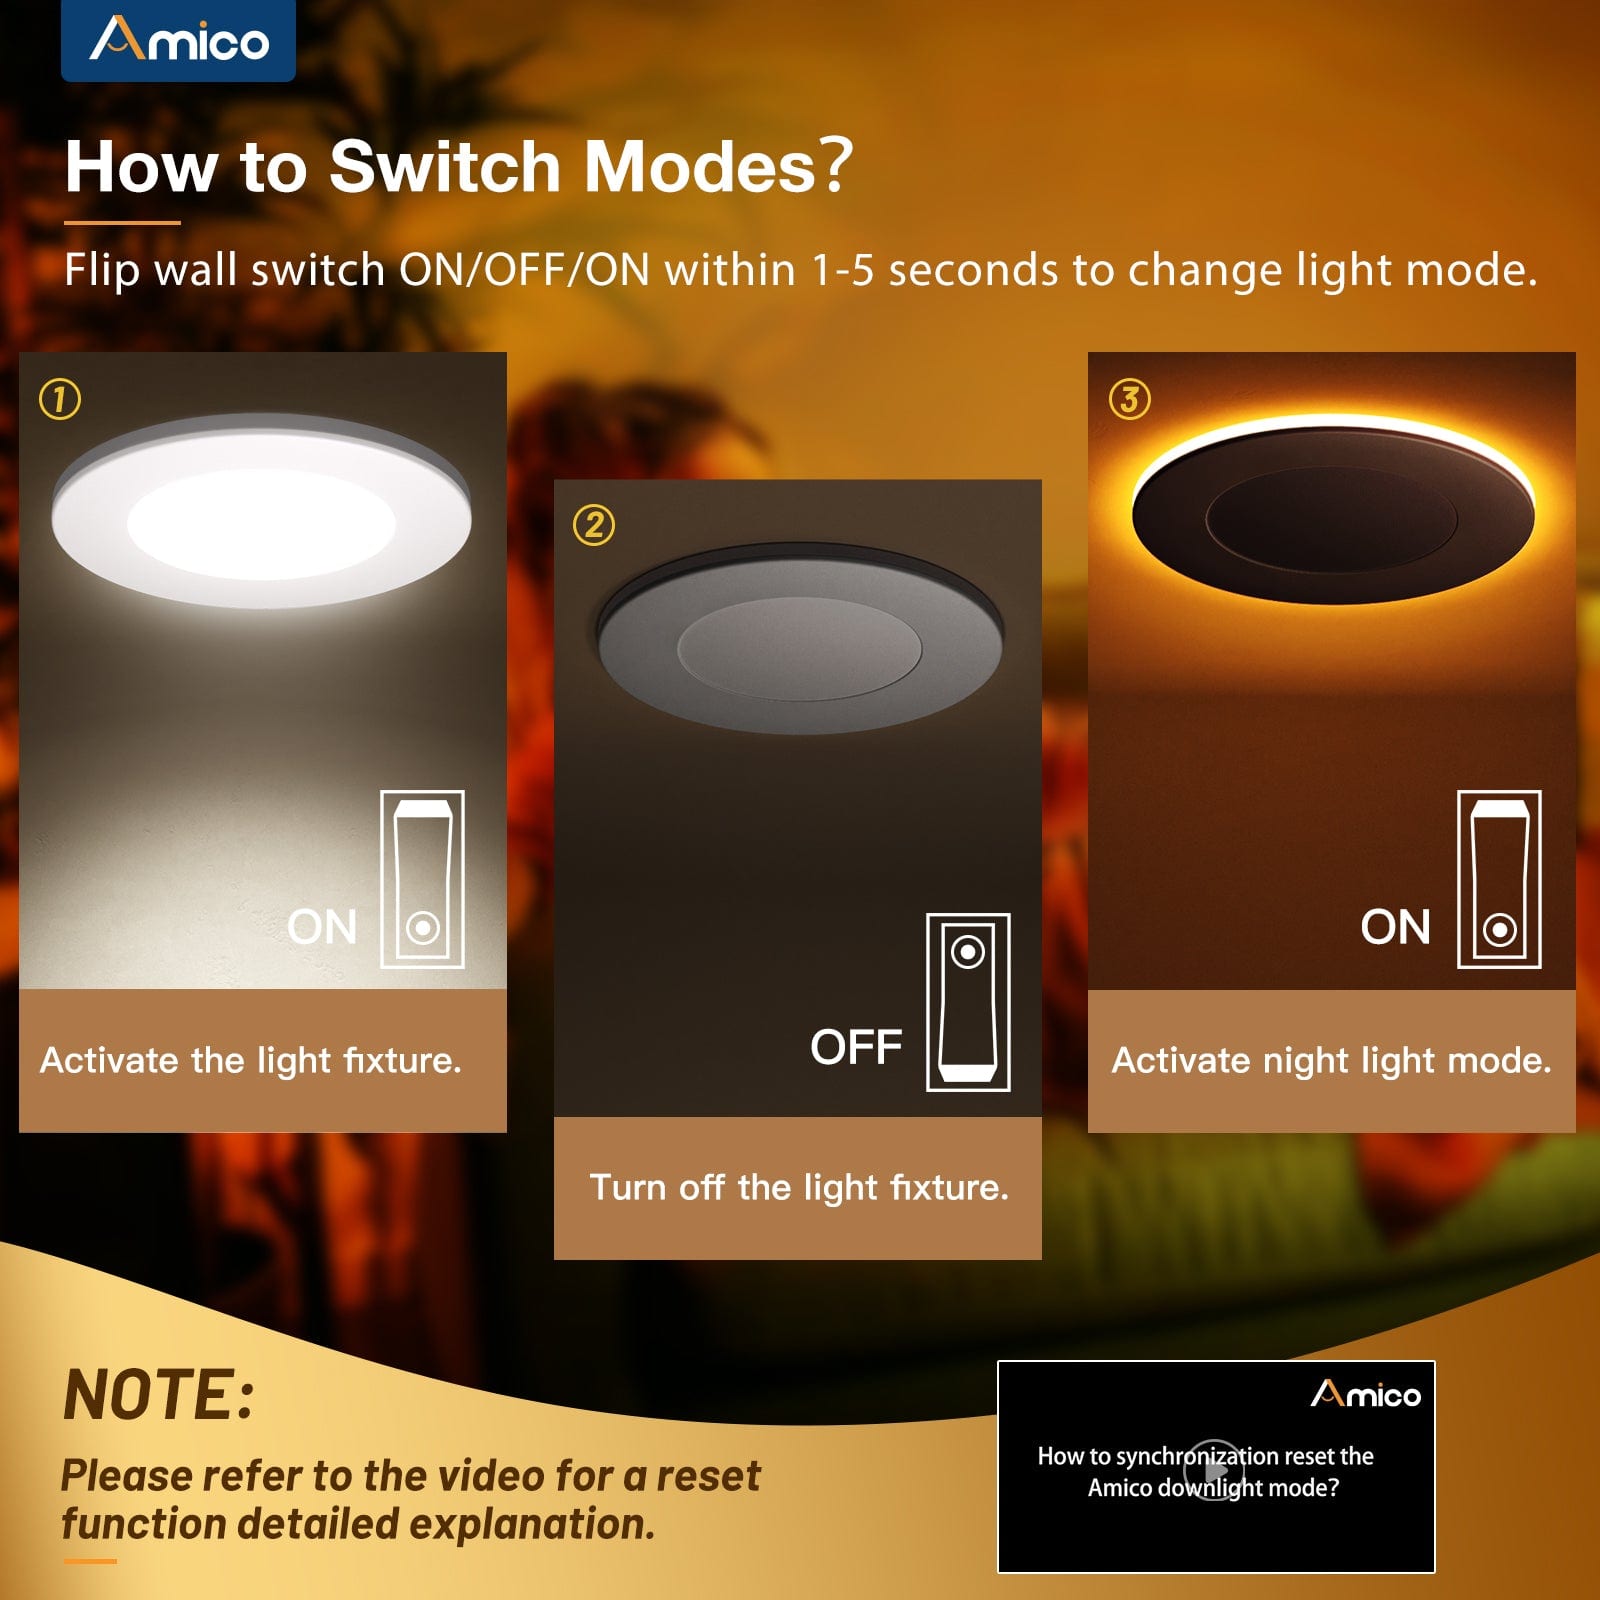 How to Switch Modes? Flip wall switch ON/OFF/ON within 1-5 seconds to change light mode.